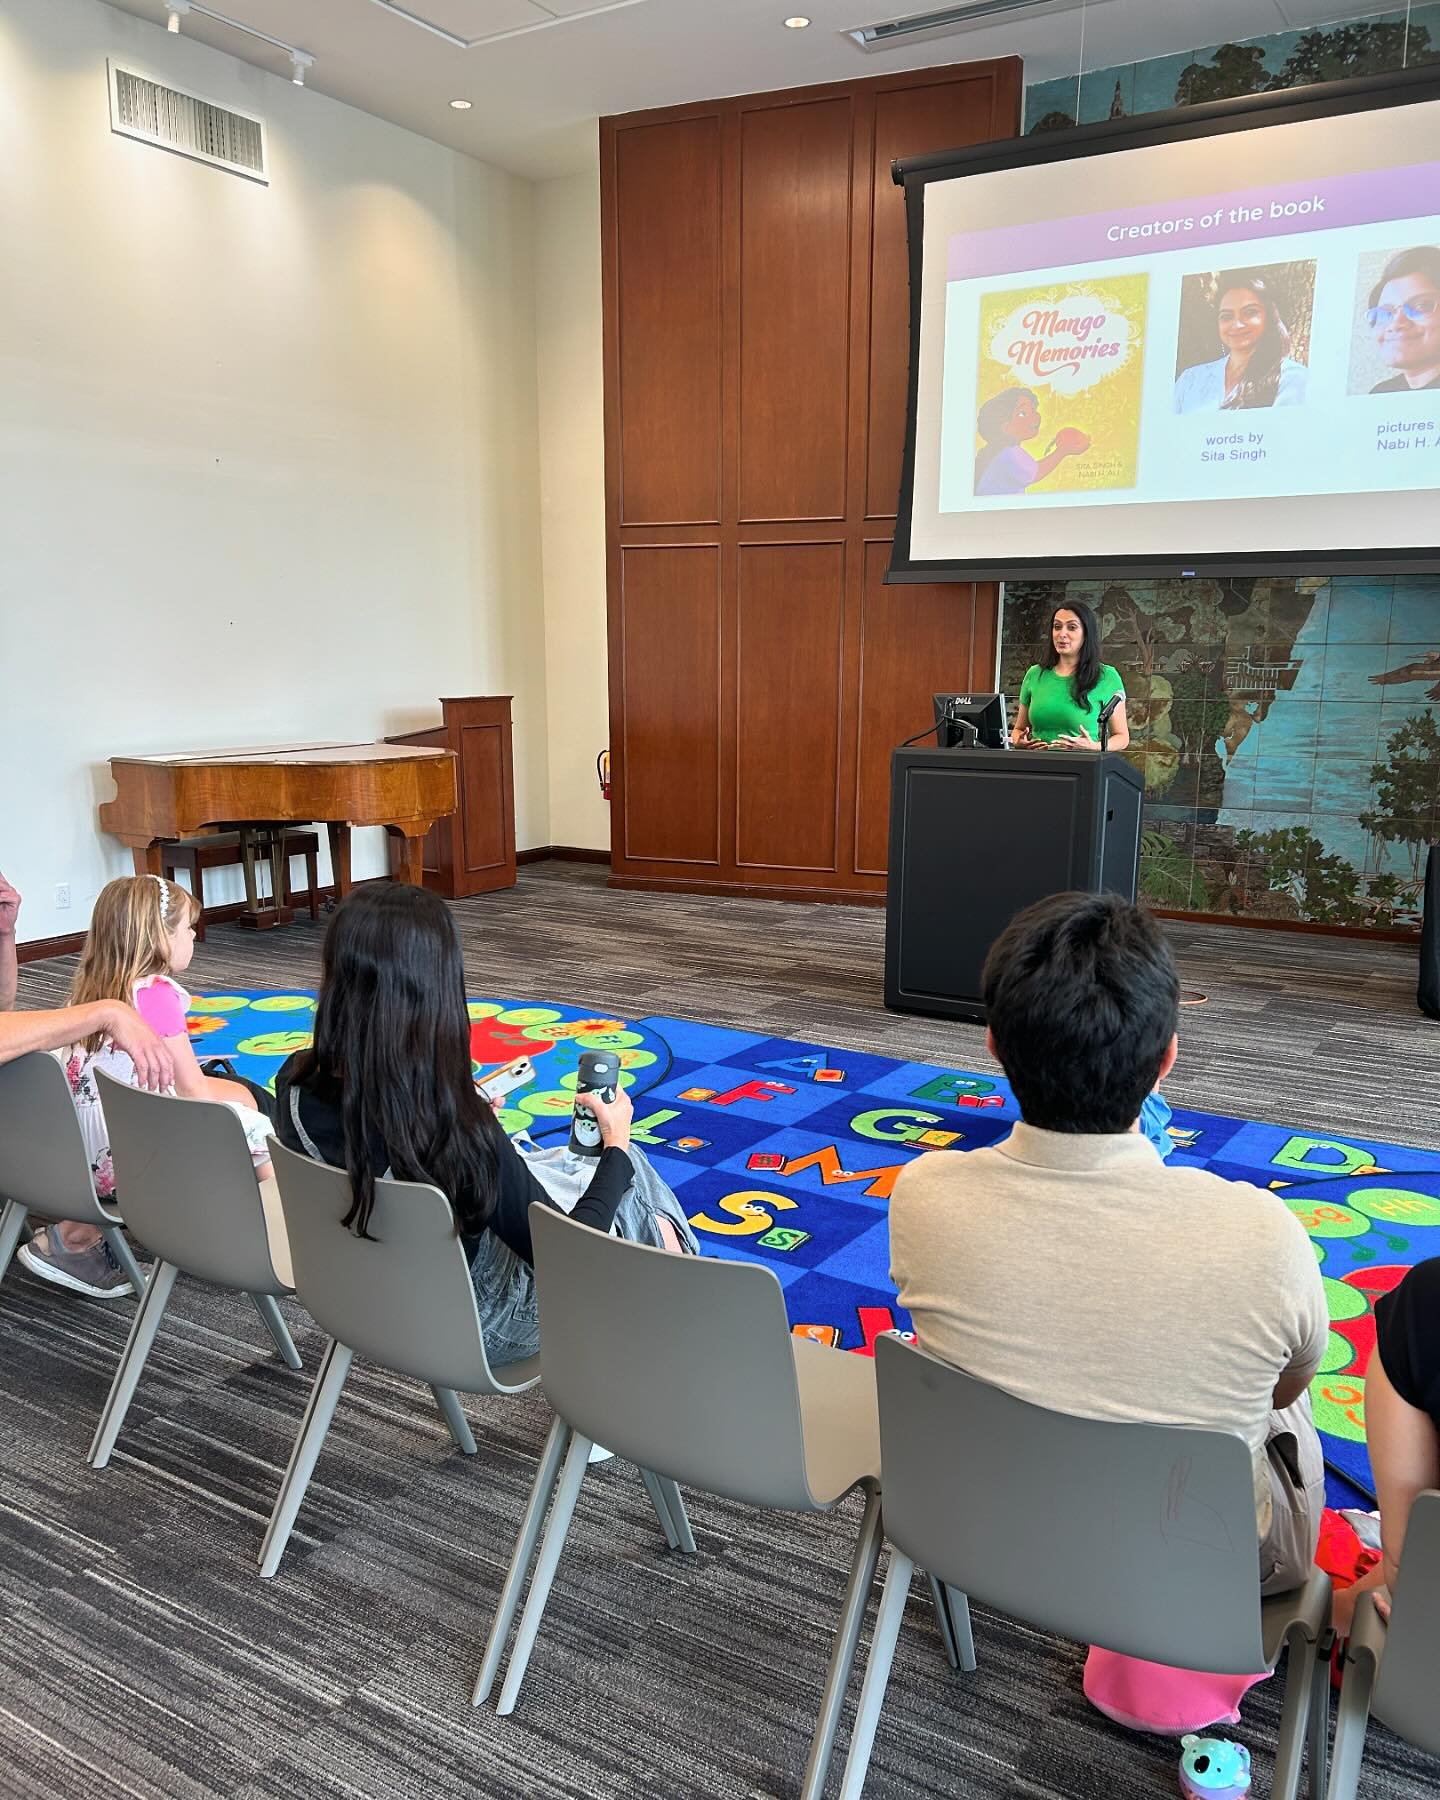 From last Saturday @miamidadepubliclibrary in Coral Gables. One little girl brought her class pet, and she was thrilled they got to meet a children&rsquo;s author. We chatted for a while even after the event was over. Connecting with little readers i